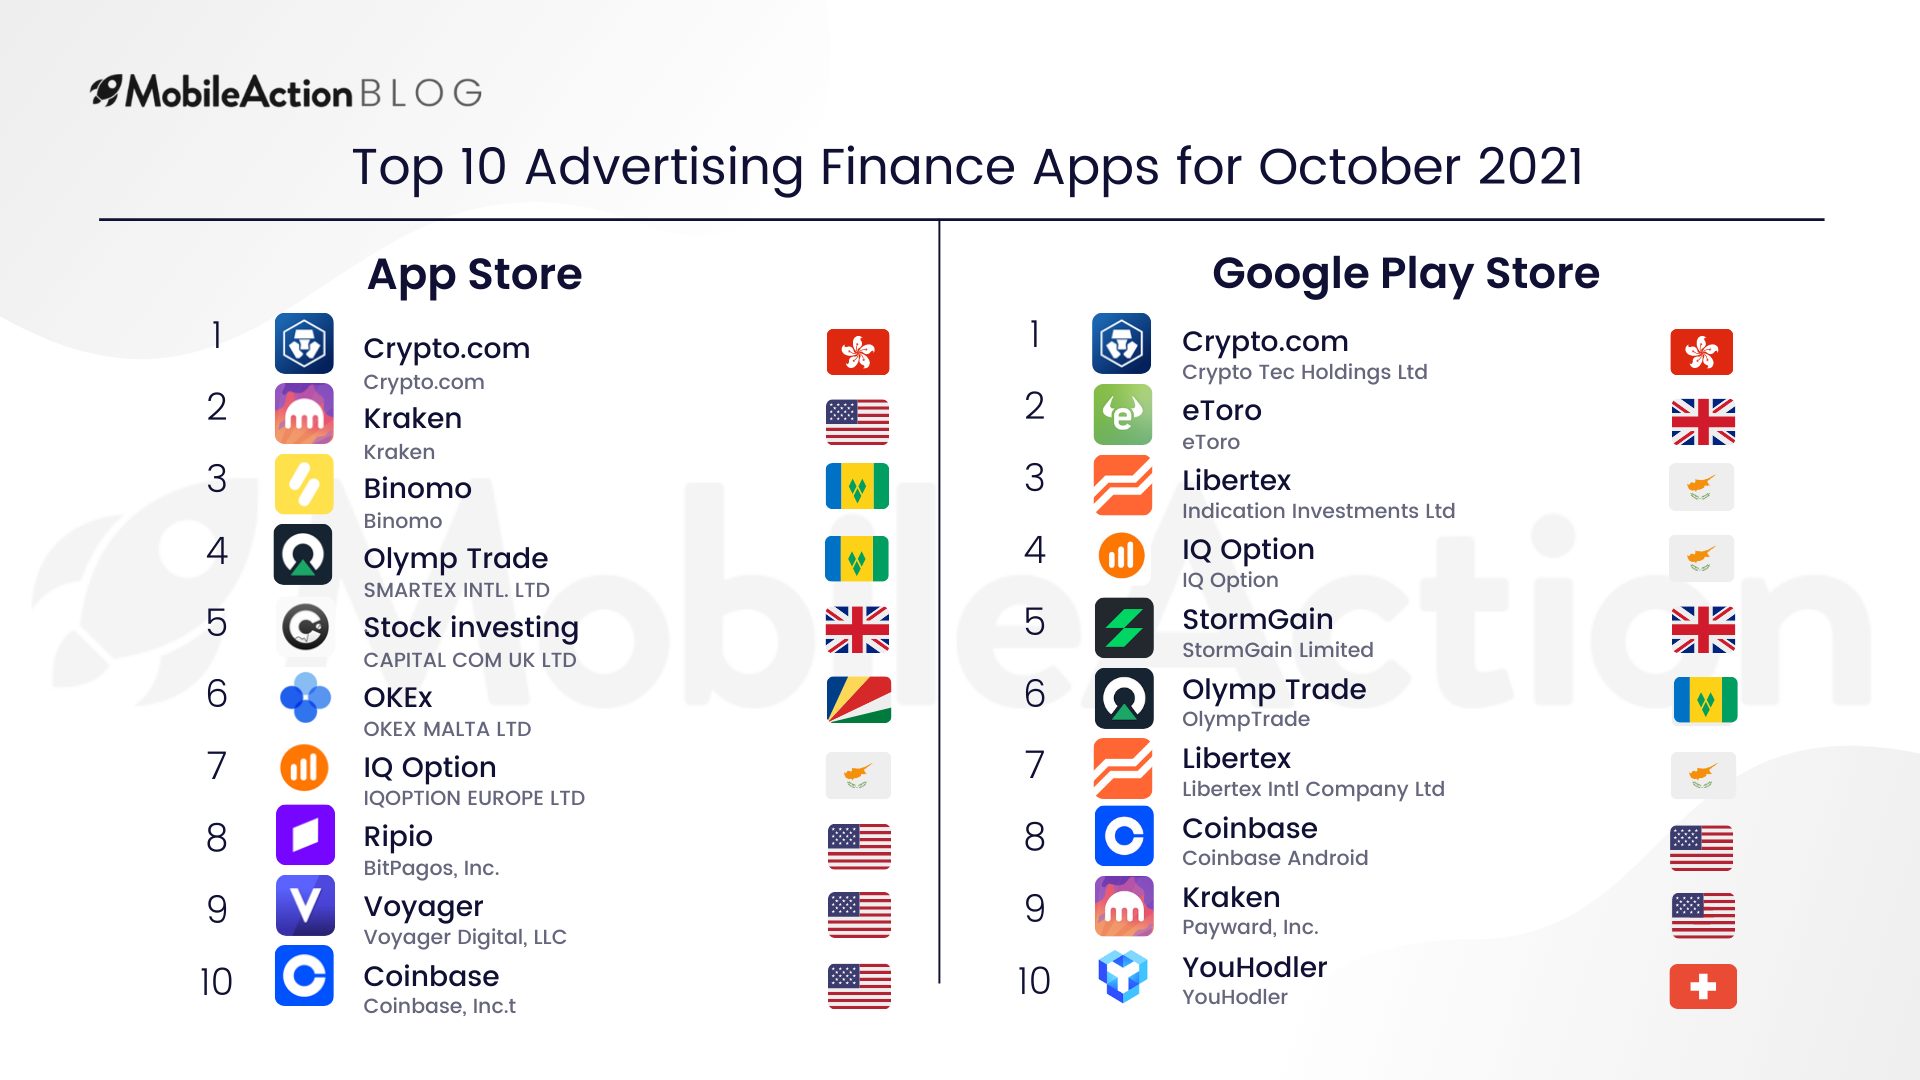 Top 10 Advertising Finance Apps for October 2021